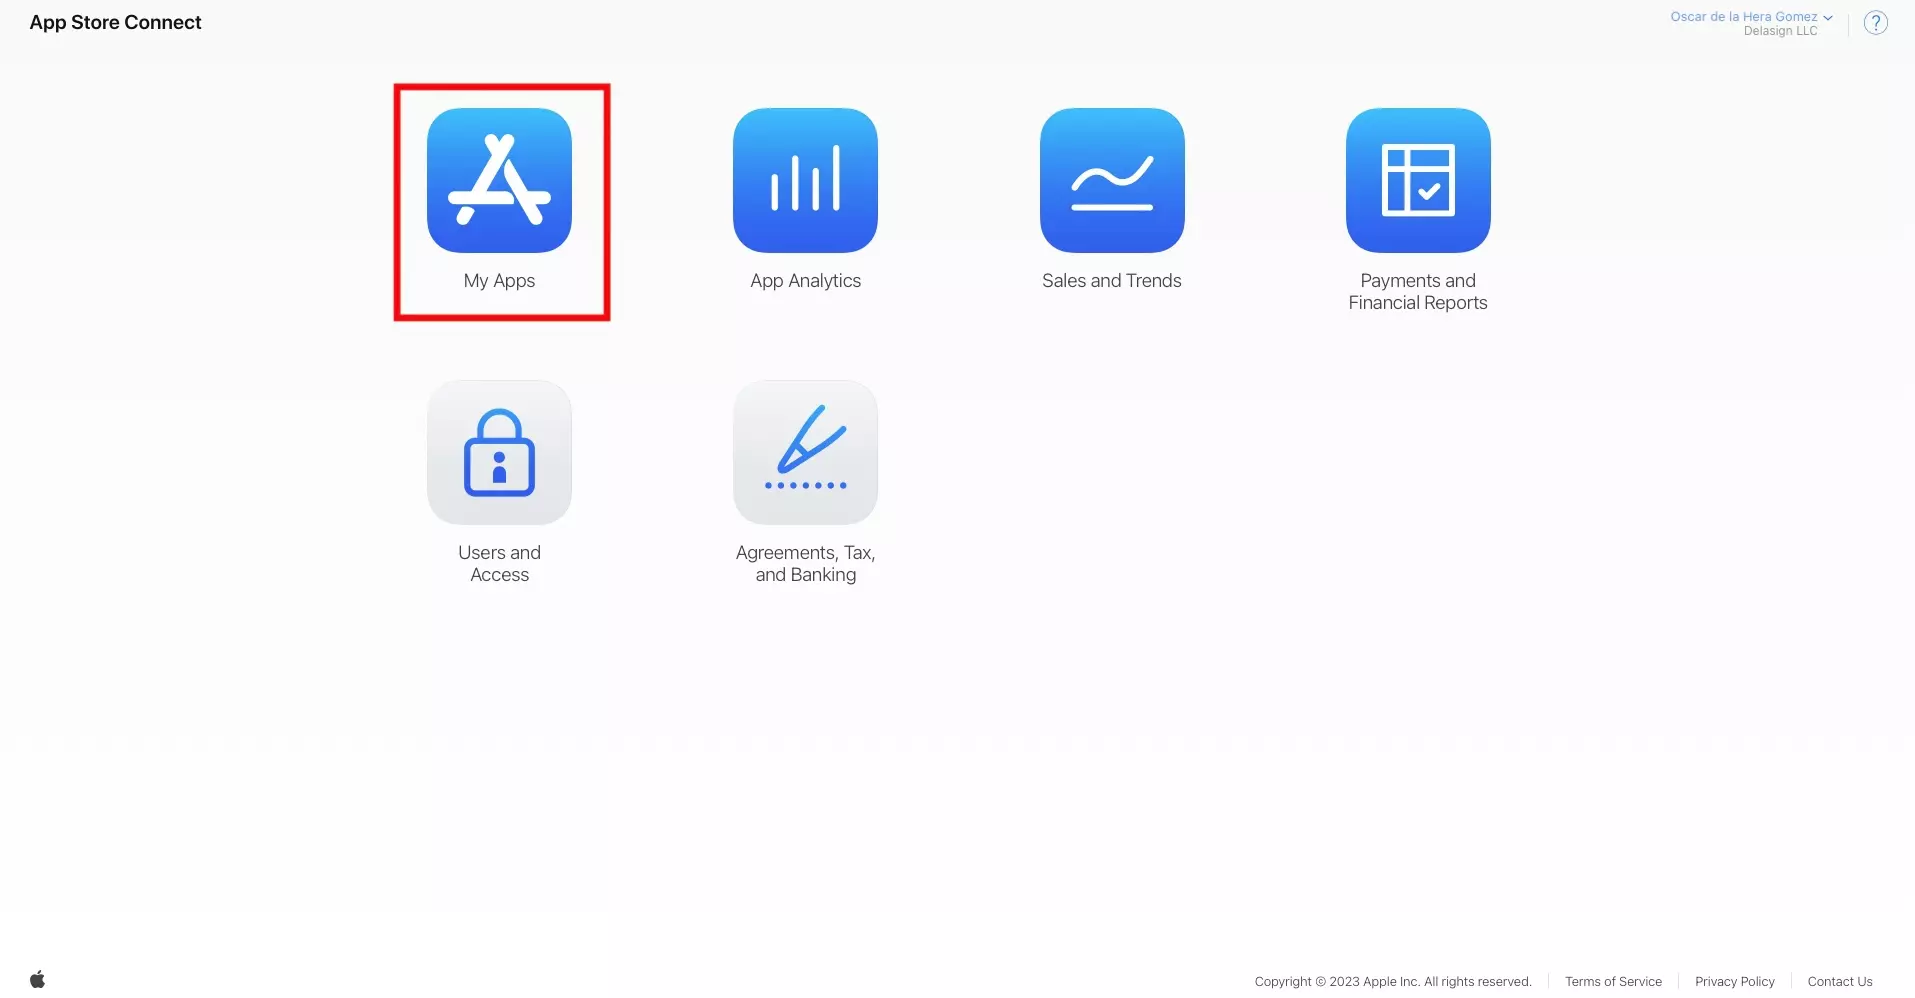 A screenshot of the App Store Connect landing page after logging in. Highlighted is the "My Apps" tile, select it and move onto the next step.